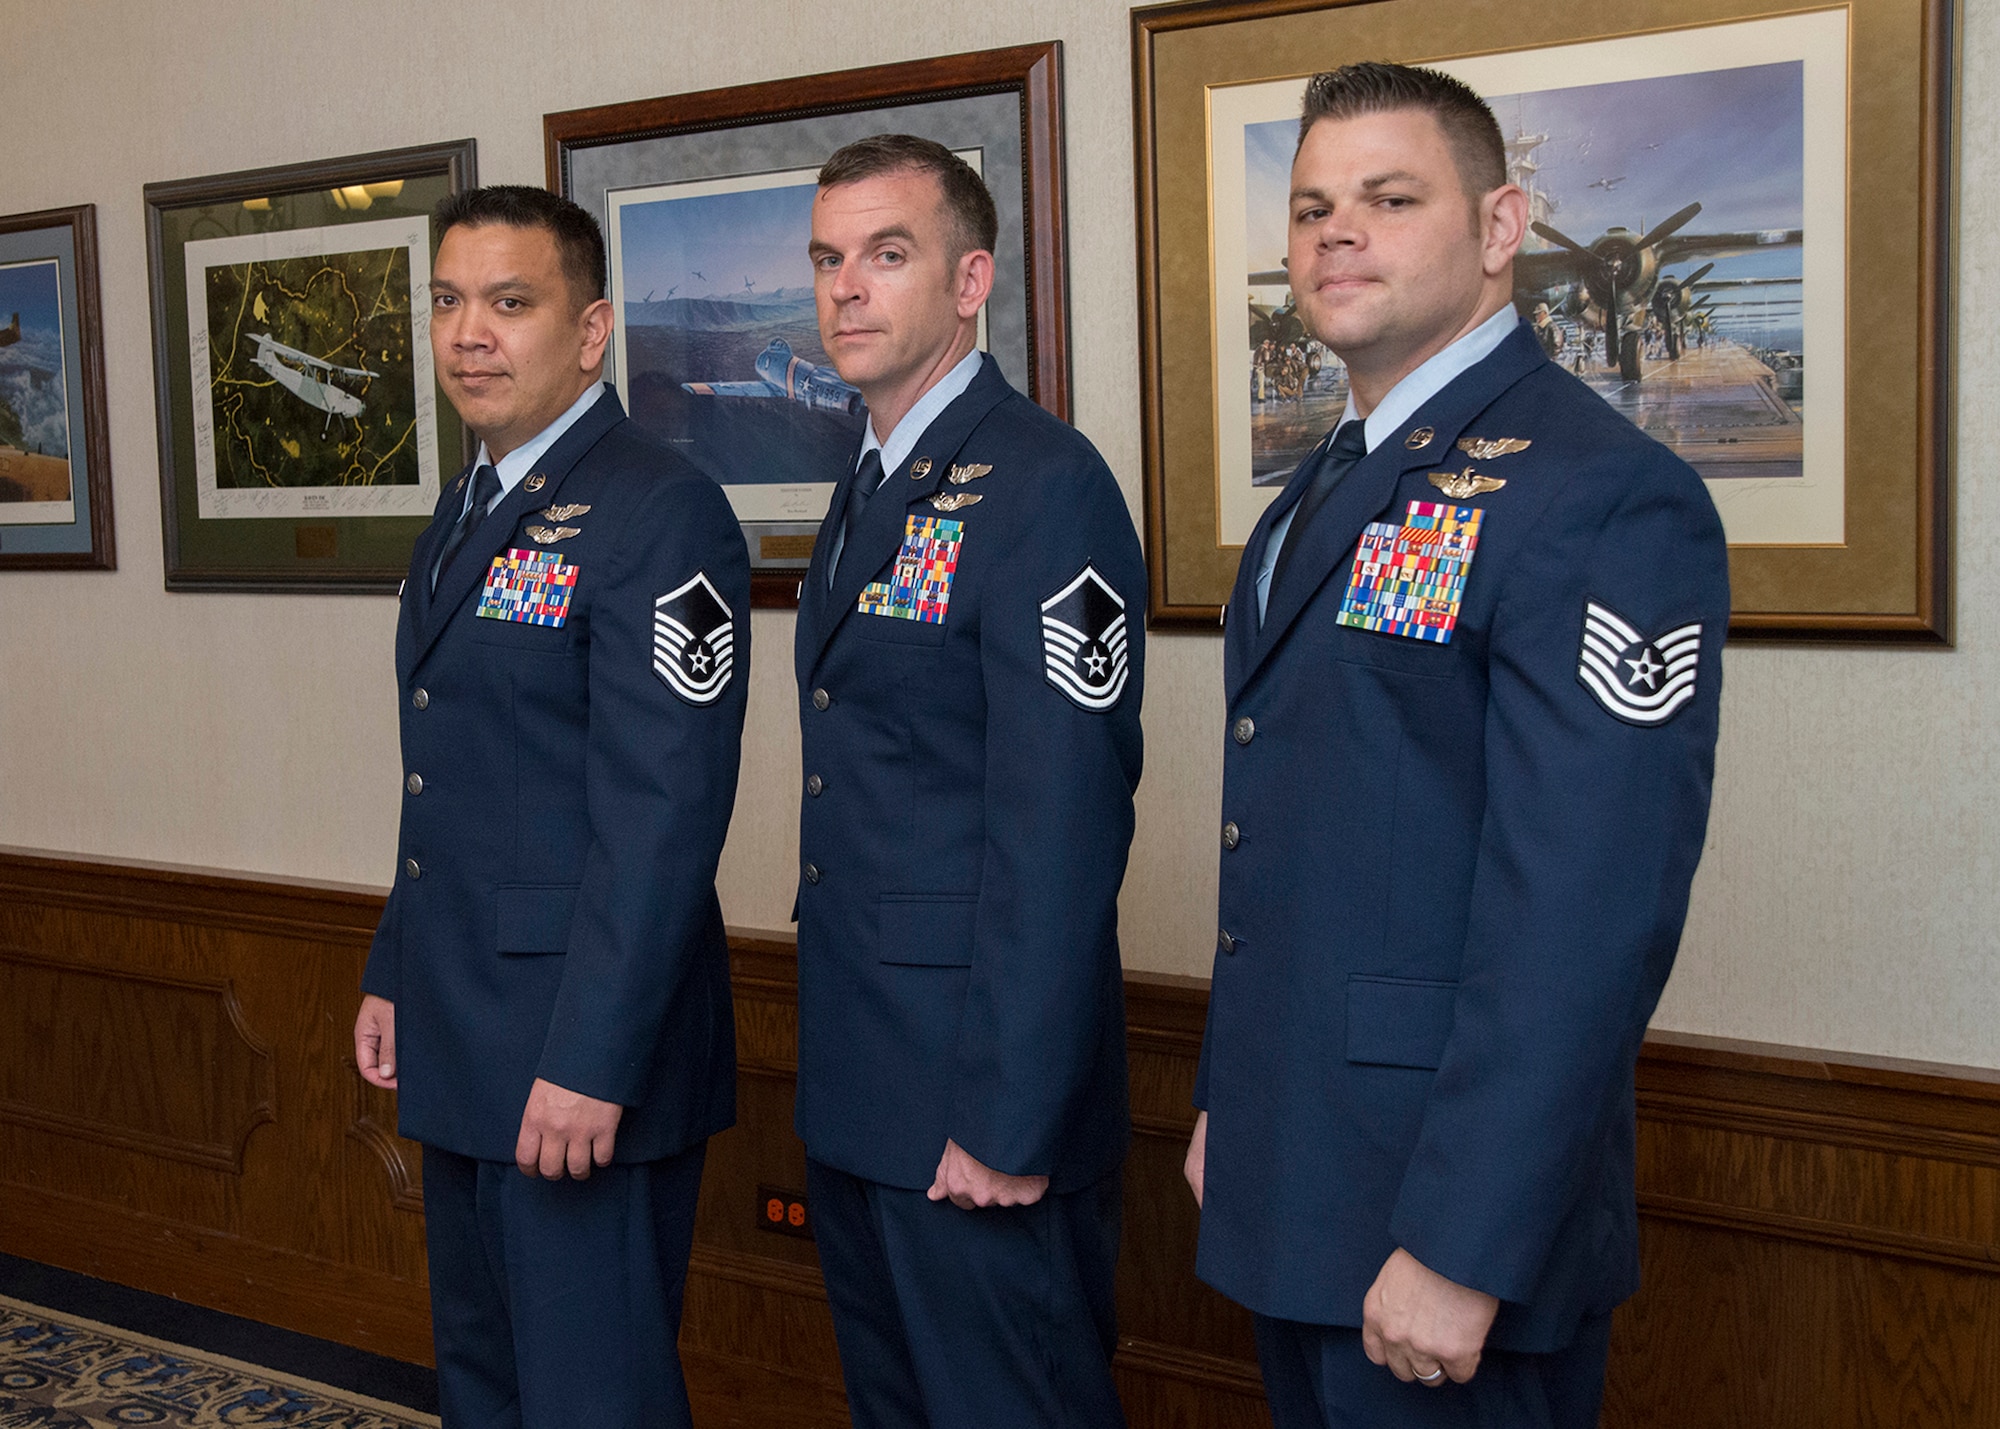 (From Left to Right) U.S. Air Force Master Sgt. Alex, Master Sgt. Mike and Tech. Sgt. Mike, Enlisted Pilot Initial Class students, stand together after graduation from the 558th Flying Training Squadron's Remotely Piloted Aircraft Fundamentals Course May 5, 2017, at Joint Base San Antonio-Randolph, Texas.  The three Airmen are the first enlisted personnel to graduate from the course, making them the service's first enlisted pilots since 1961.
(U.S. Air Force Photo by Melissa Peterson)